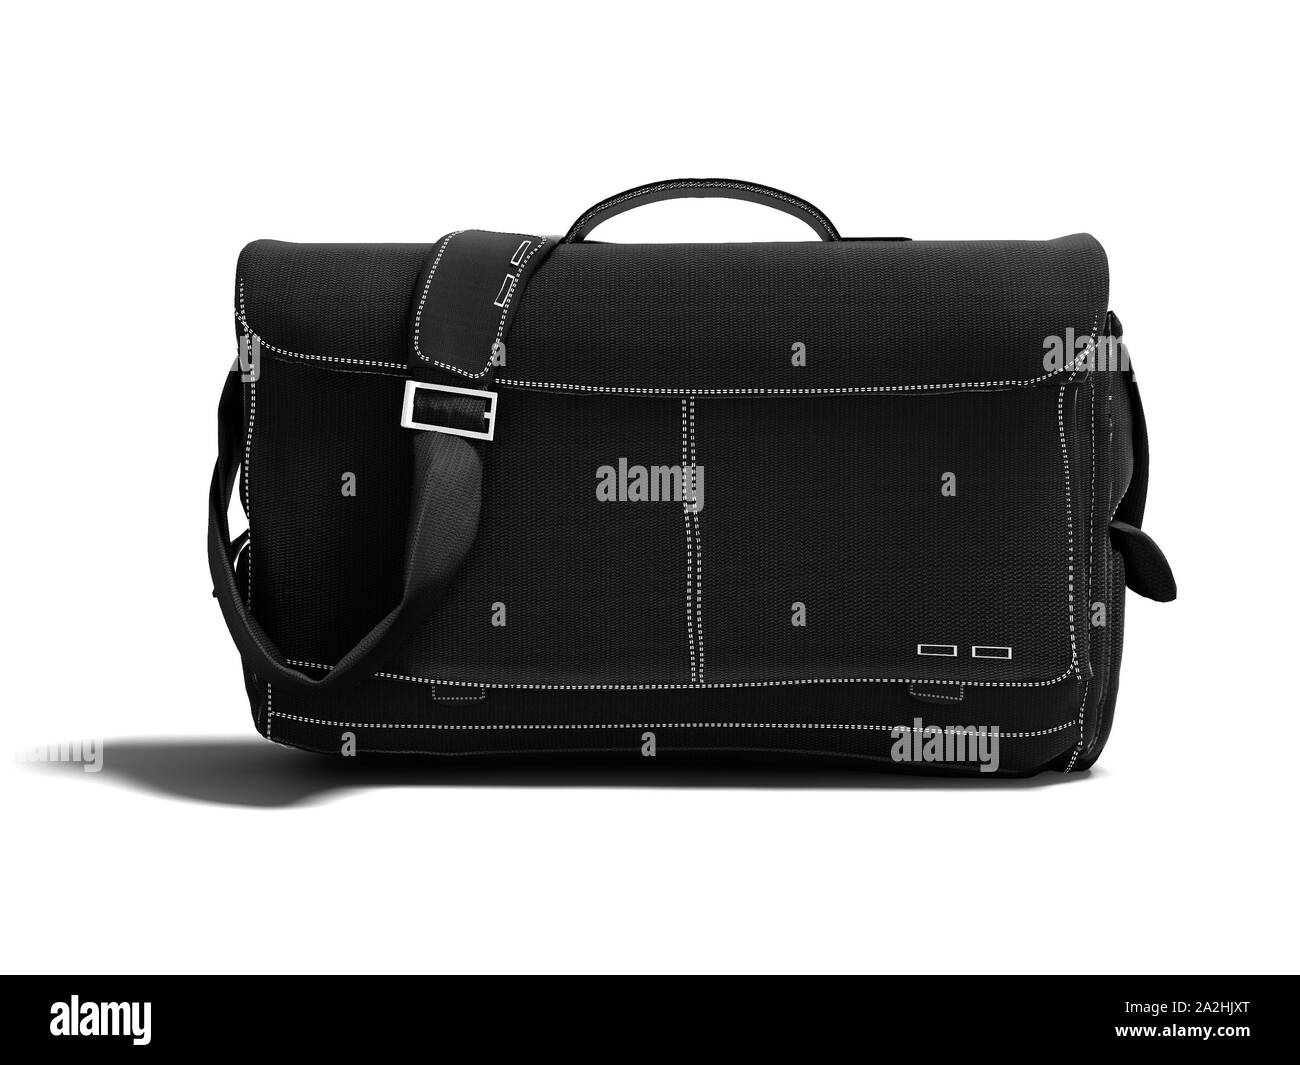 Shoulder strap Black and White Stock Photos & Images - Alamy